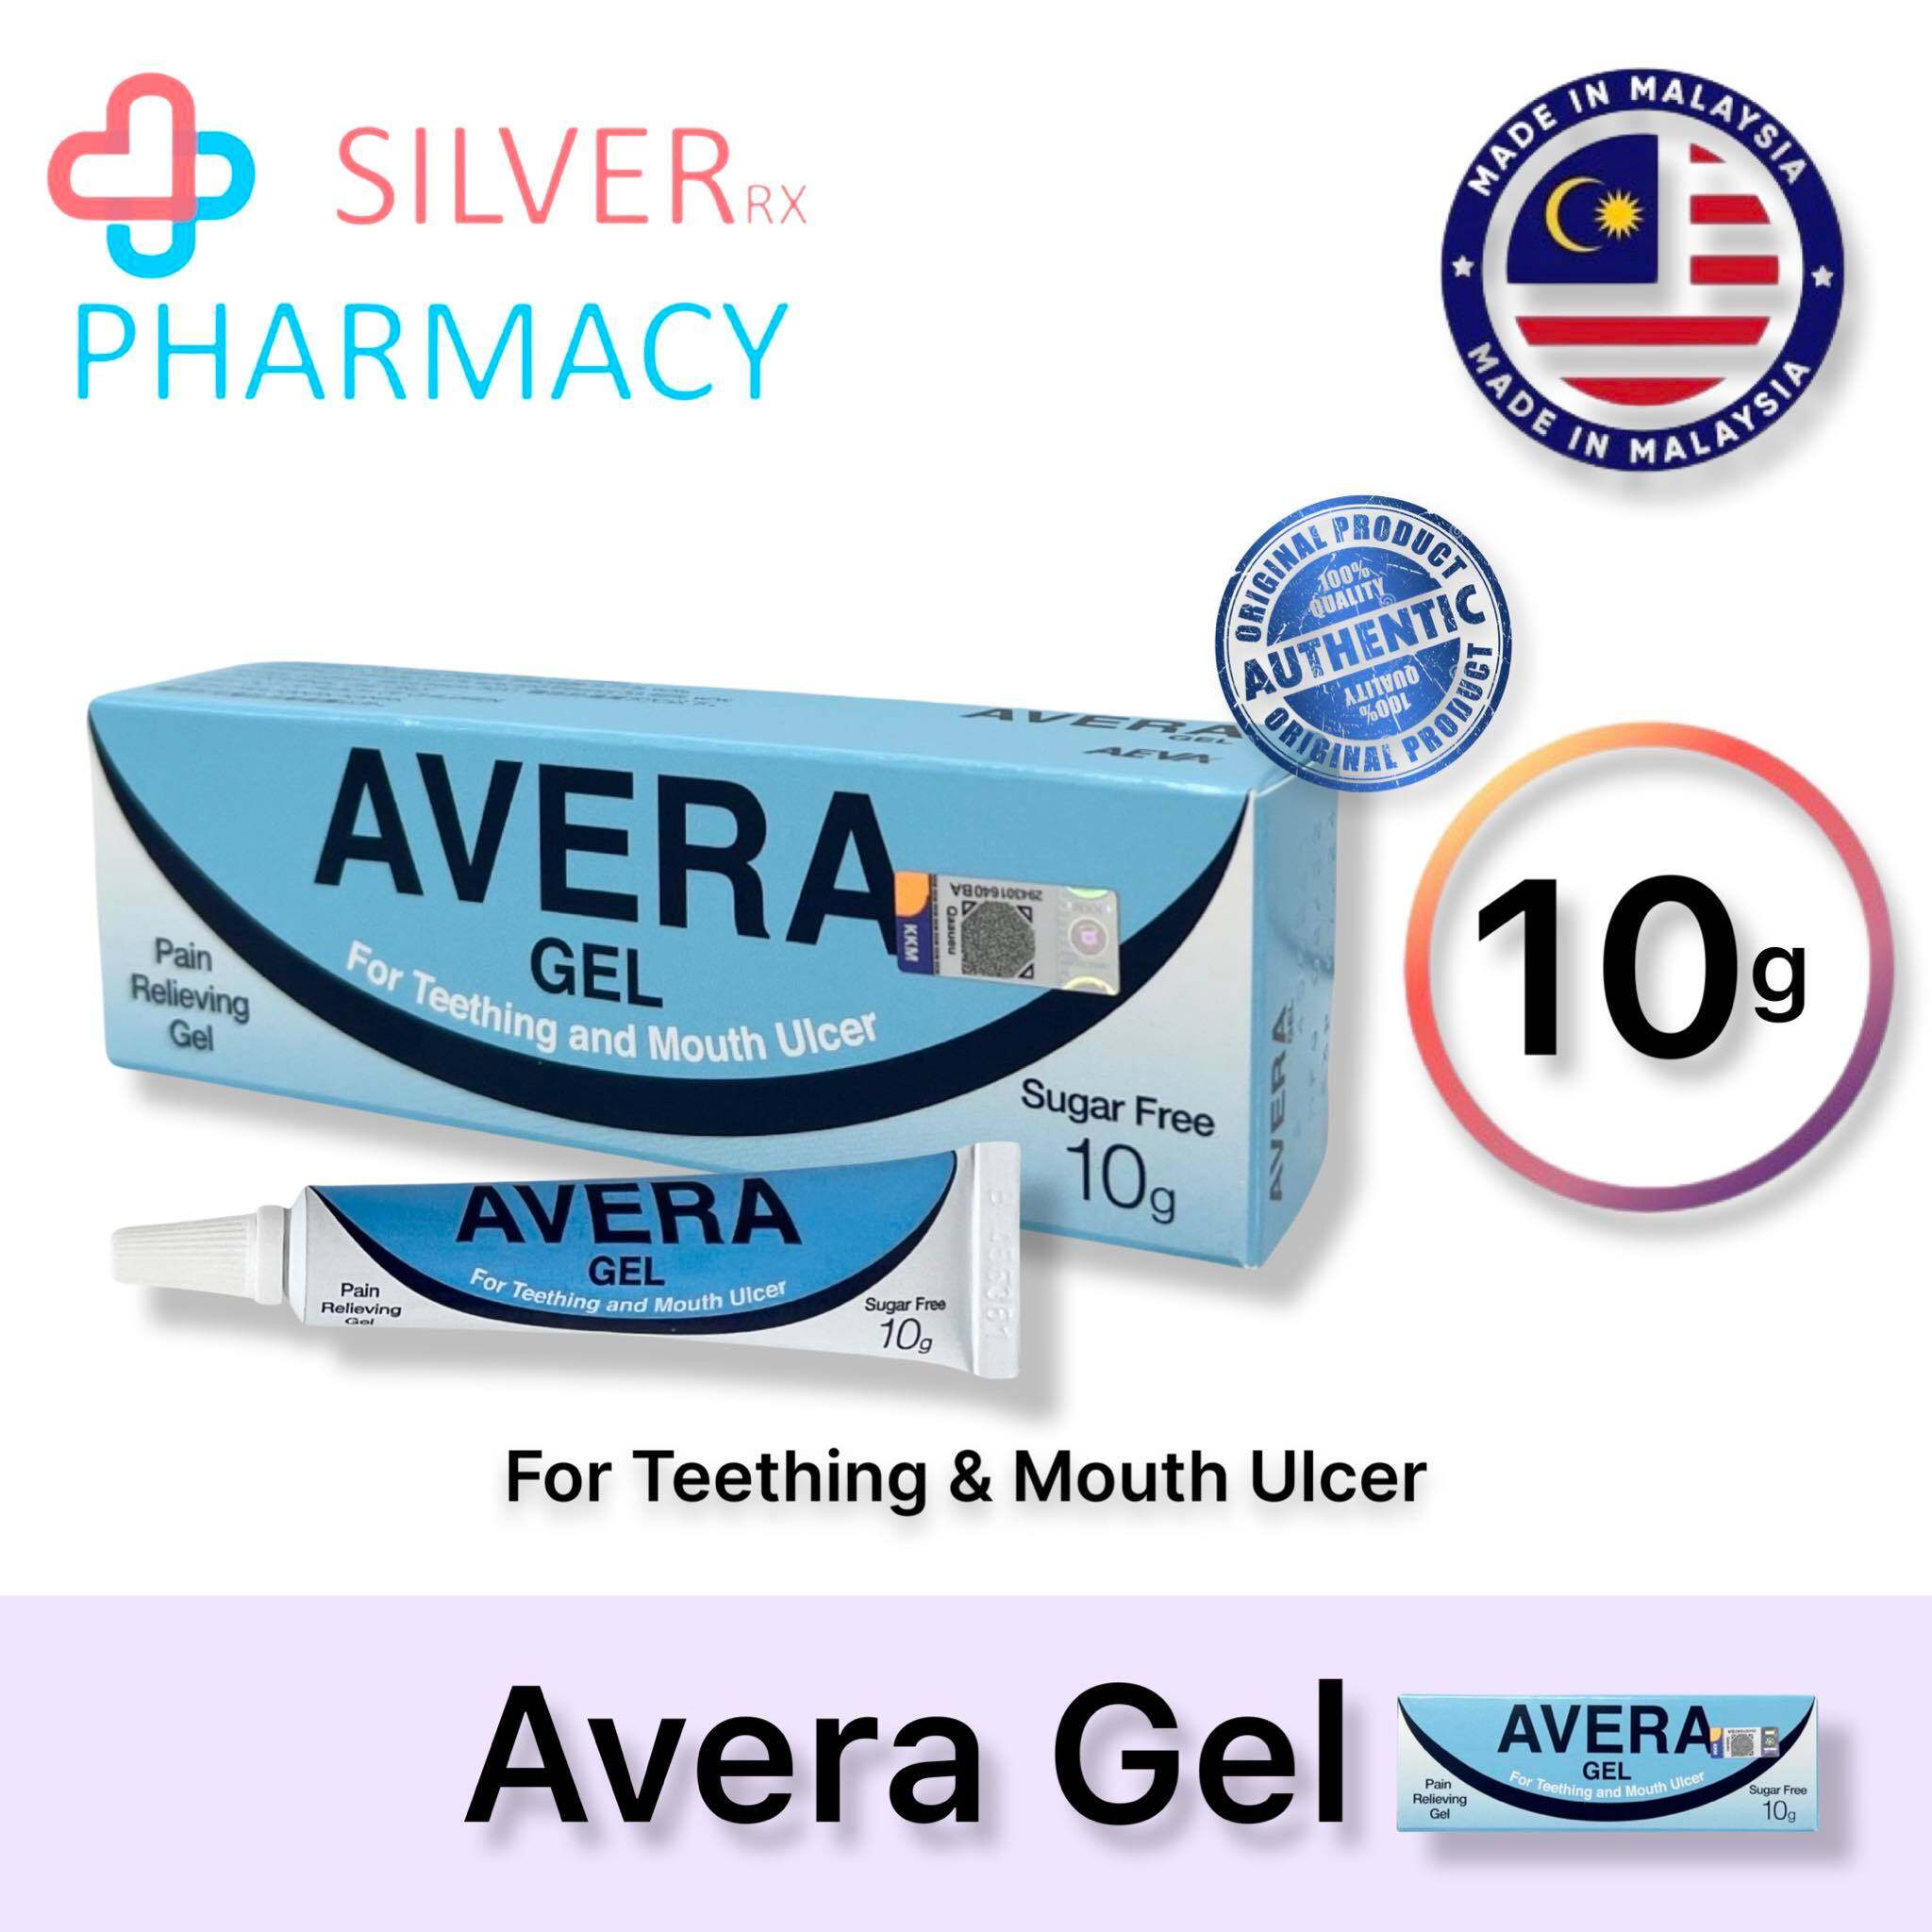 [Exp 02/2025] Avera Gel For Teething and Mouth Ulcer Sugar Free 10g